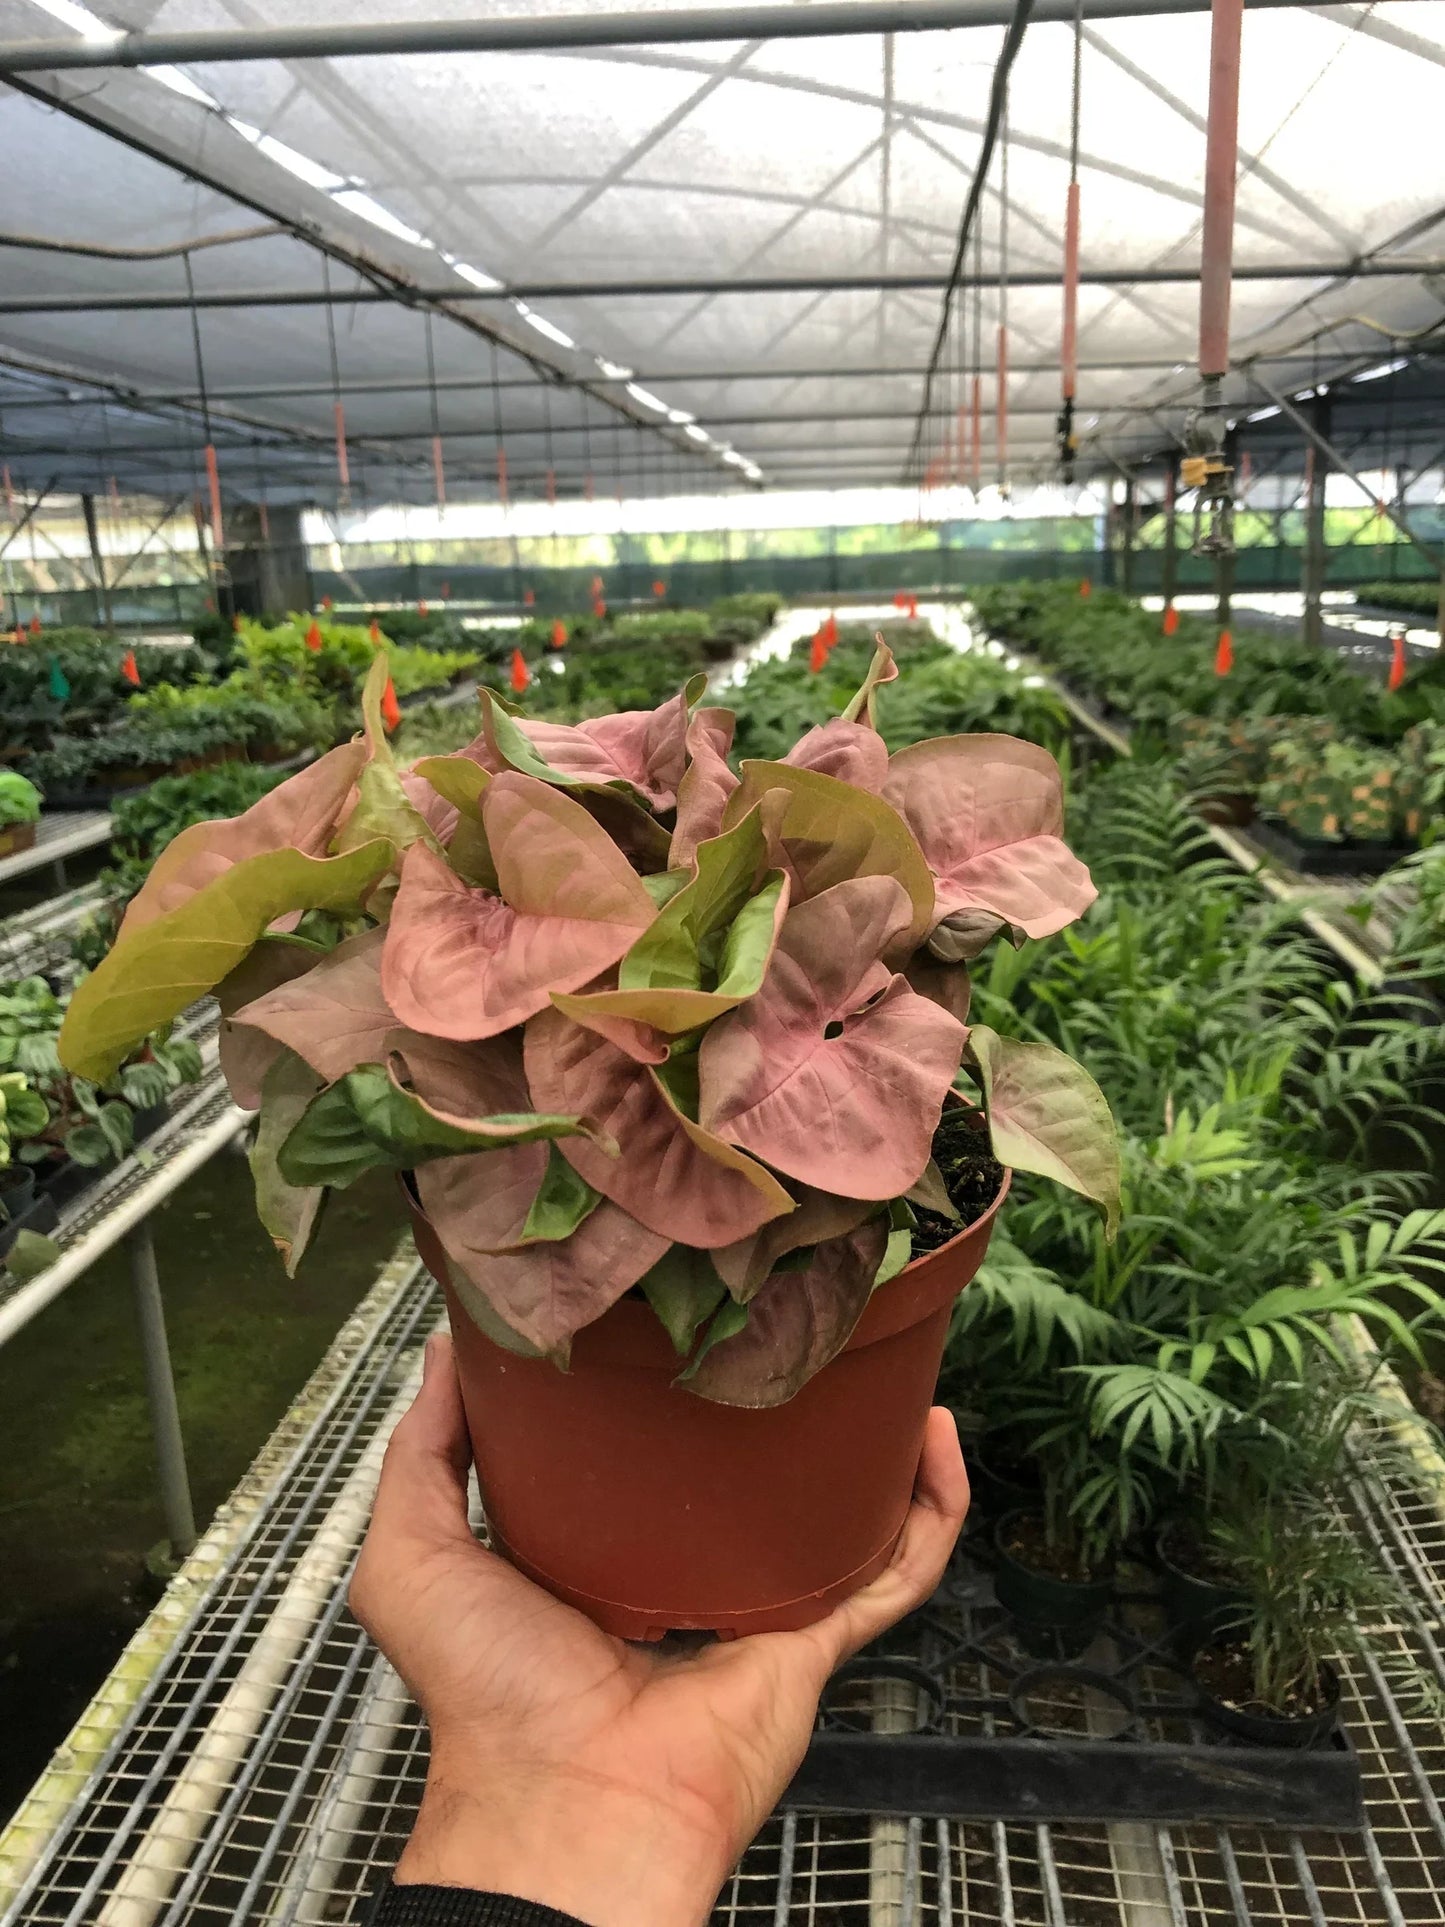 Syngonium Podophyllum 'Strawberry' - Large, Thin, Heart Shaped Strawberry Colored Leaves, Low Maintenance Tropical Houseplant- (3 Inch, 4 Inch or 6 Inch Nursery Pot)